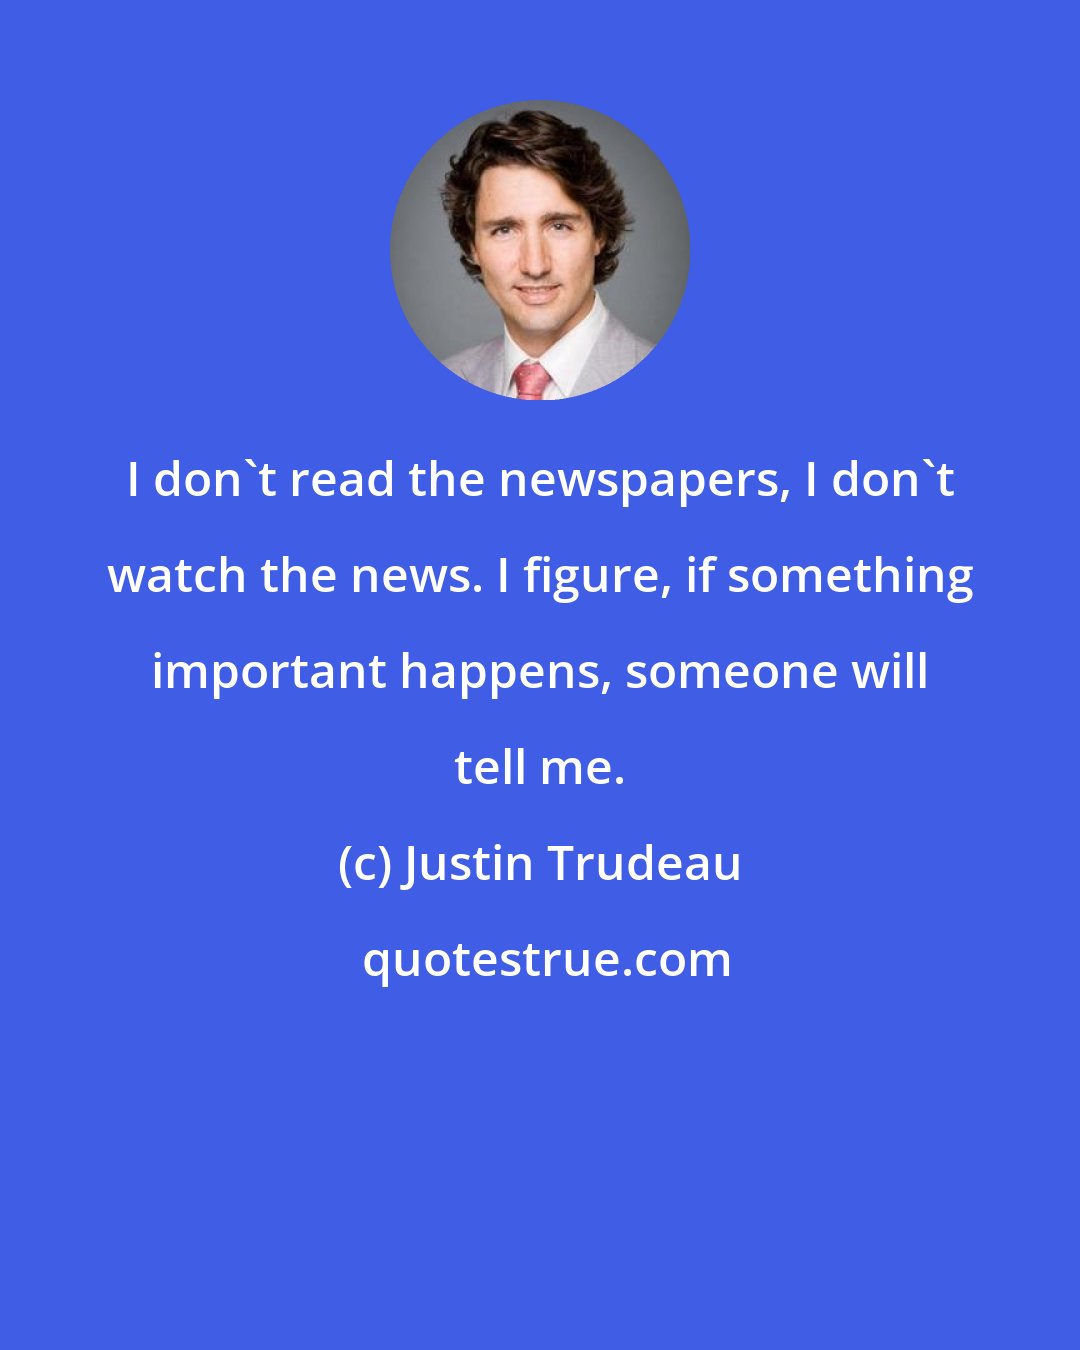 Justin Trudeau: I don't read the newspapers, I don't watch the news. I figure, if something important happens, someone will tell me.